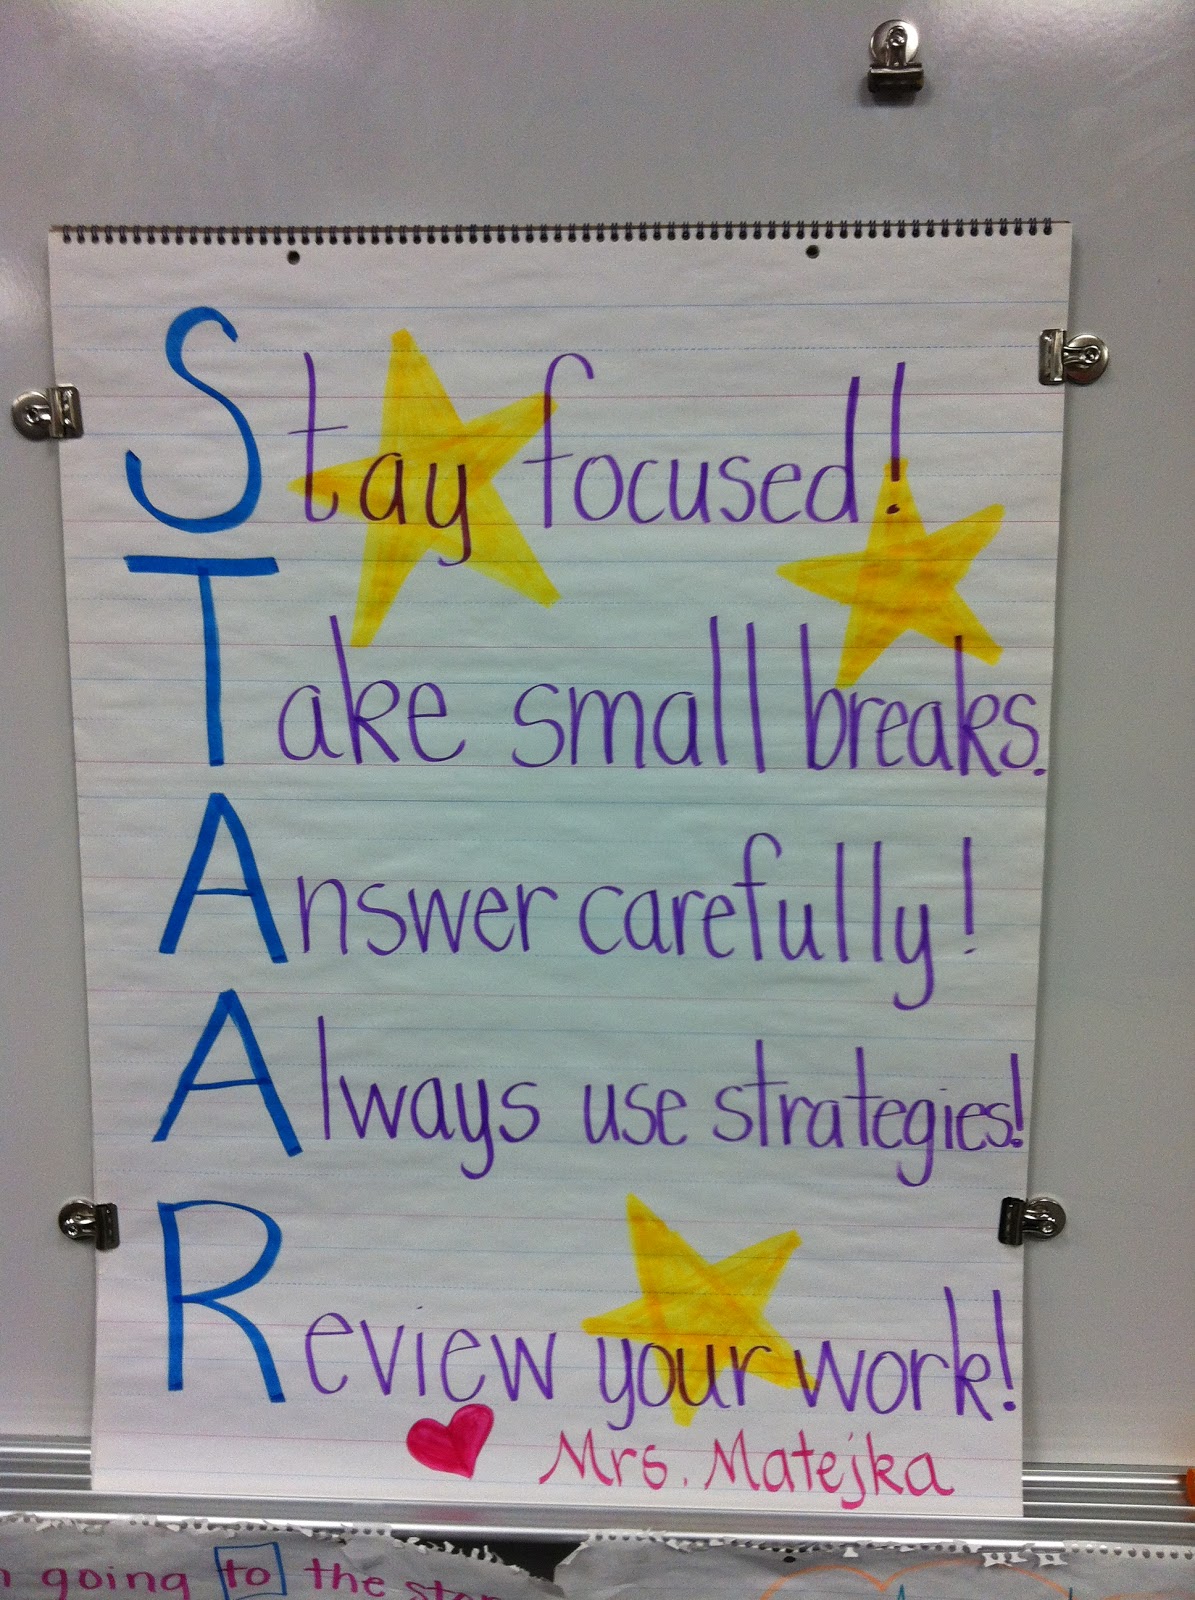 Confessions of a (former) Fourth Grade Teacher: My Anchor Charts!